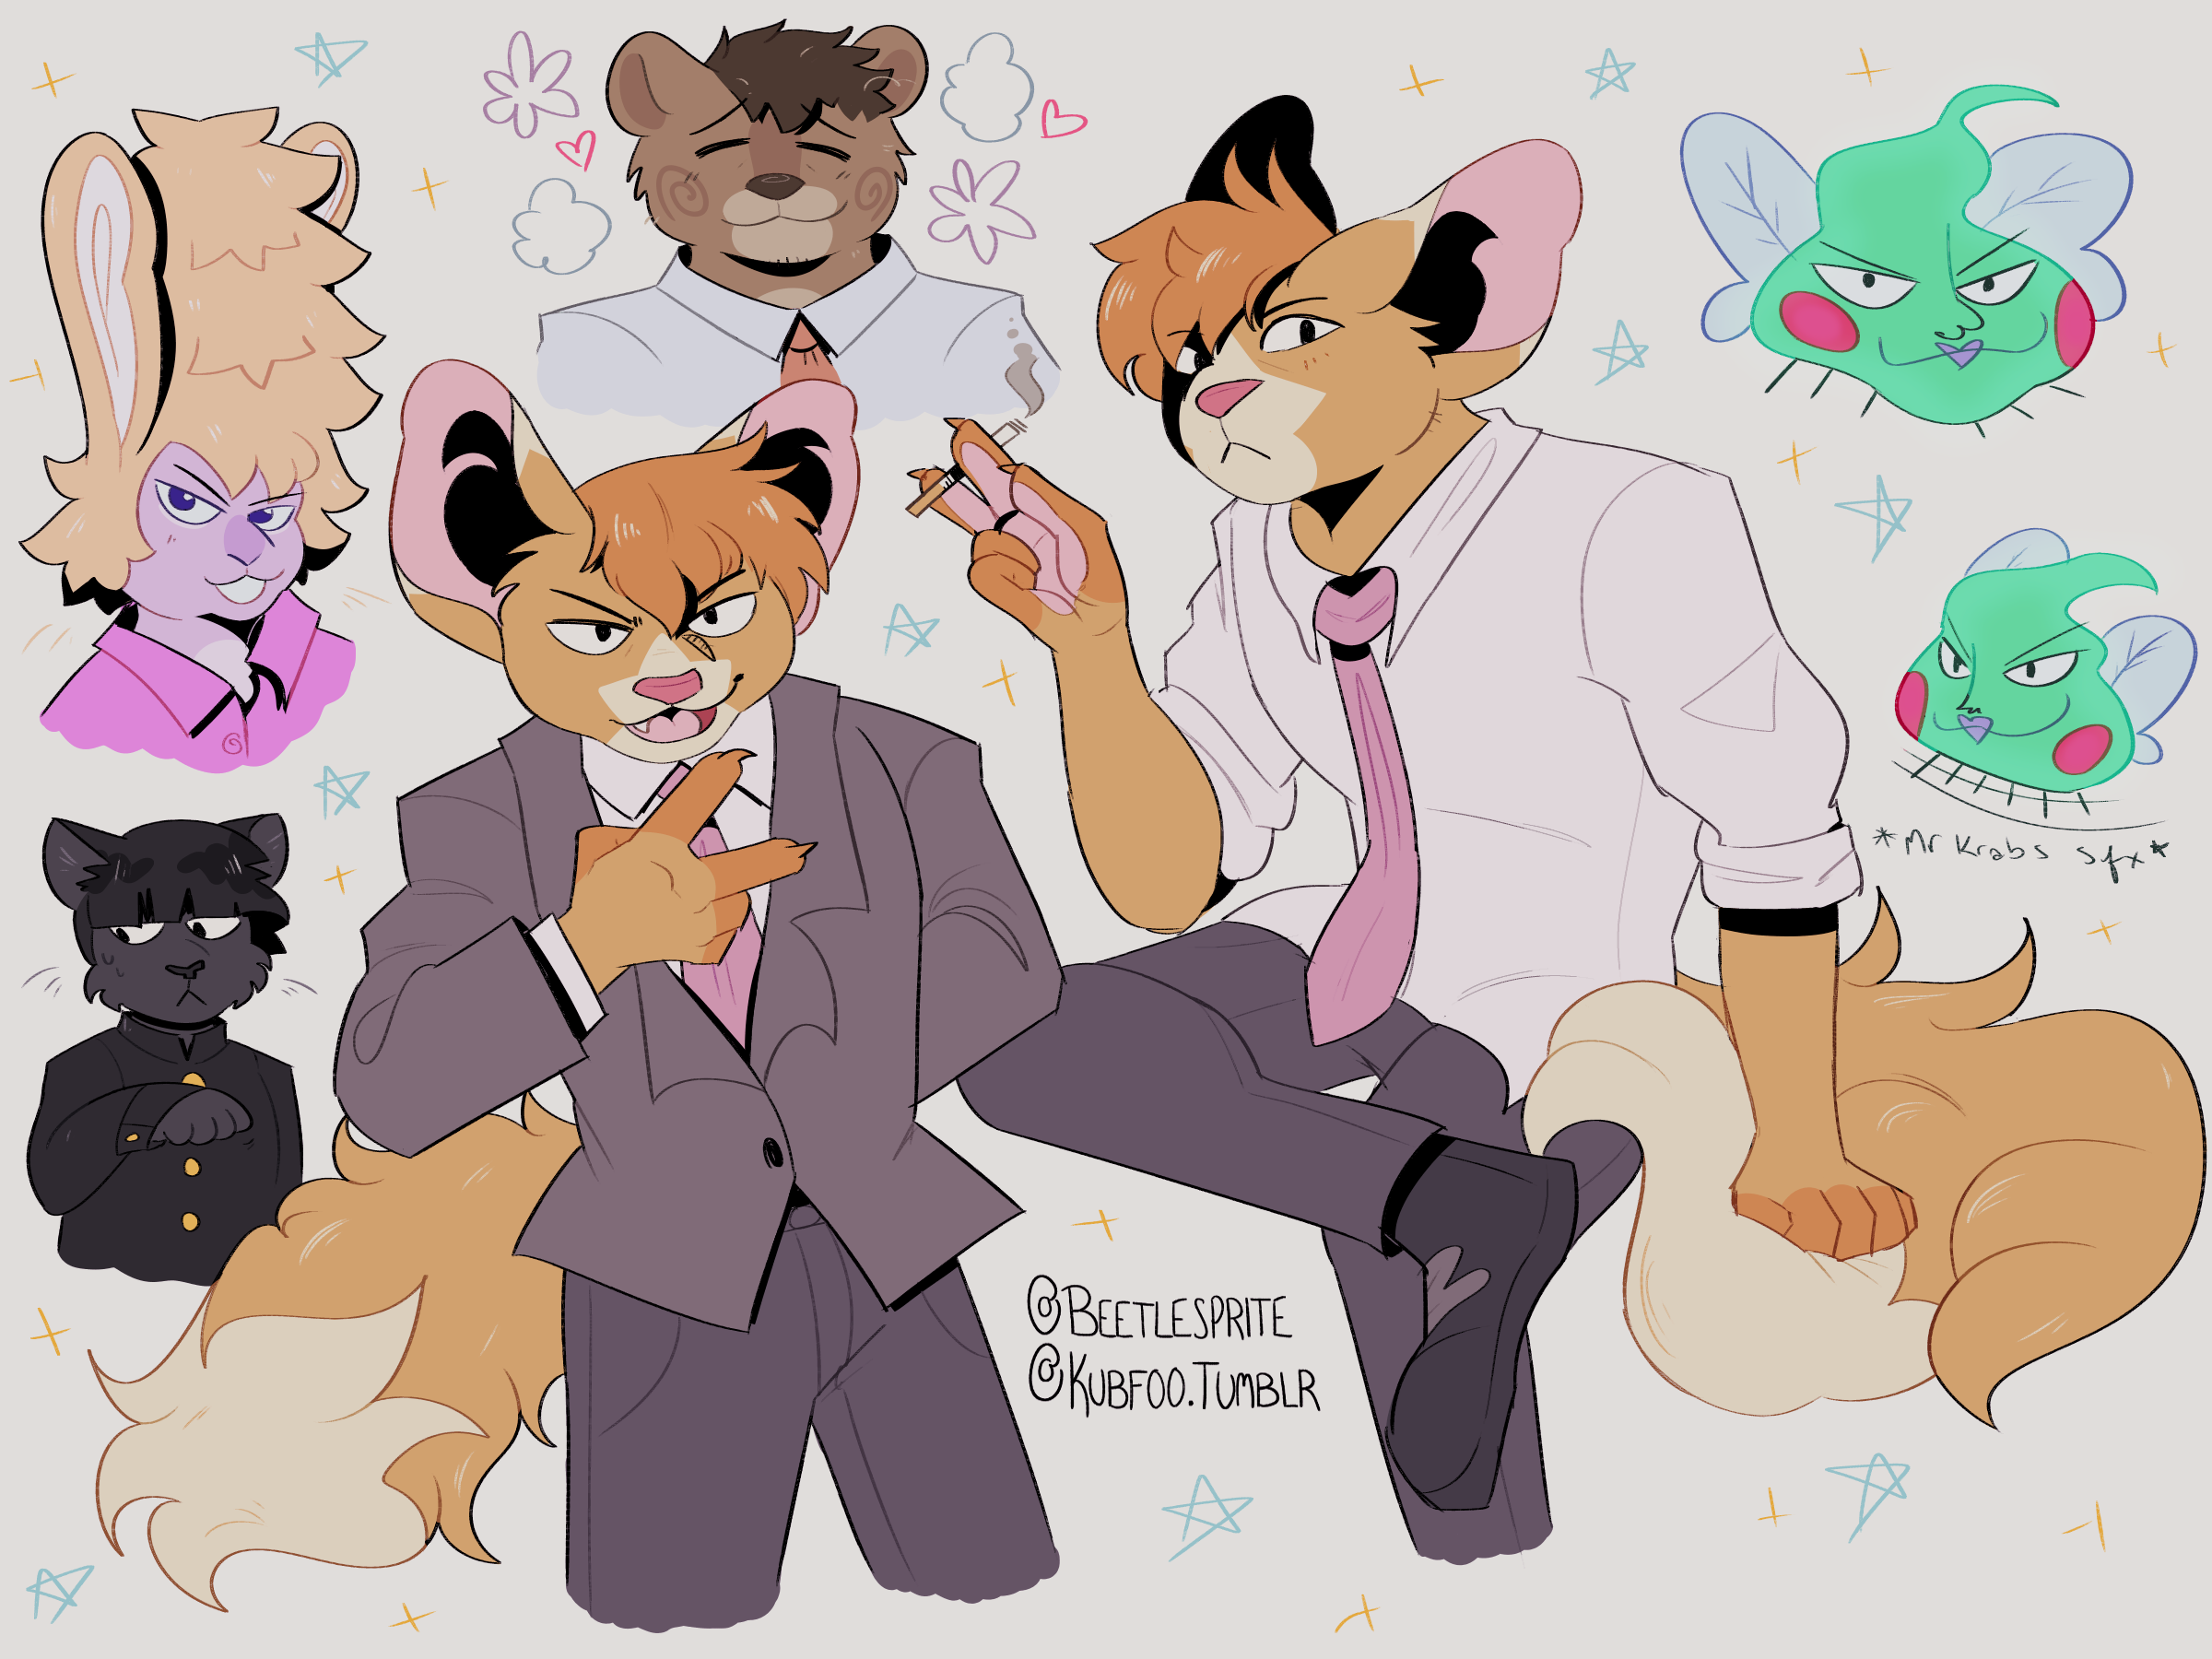 A cartoon drawing of several characters from Mob Psycho 100. There are two drawings of Reigen, who is drawn as a pale orange fennec fox furry with darker ginger hair and a very fluffy tail. <br />
<br />
In one drawing he is in a gray business suit and pink tie, with one hand doing a rock-paper-scissors "scissor" sign. The other hand is behind his back, and he's grinning open-mouthed. In the second drawing, he is sitting with one leg crossed and a cigarette in his other hand, without his blazer. <br />
<br />
To the right is two drawings of Dimple, a bright green blob with red cheeks and a poorly drawn face. He has crudely drawn fly wings and six, stubby stick-legs. “Mr Krabs sfx” is written under one of the drawings, where he is cartoonishly running. <br />
<br />
To the left is Mob, a black cat furry with a bowl cut, in a black school uniform. He has one paw raised as if going "Nya". <br />
<br />
Above him is a shoulders-up of Teru, who is a purple-pink bunny furry with a tall blonde wig with tall rabbit ears of the same height. He is wearing a pink button-up. <br />
<br />
Next to him is Serizawa, a bear furry, who is smiling shyly.<br />
<br />
There are light blue hand-drawn stars and yellow sparkles scattered around the picture.